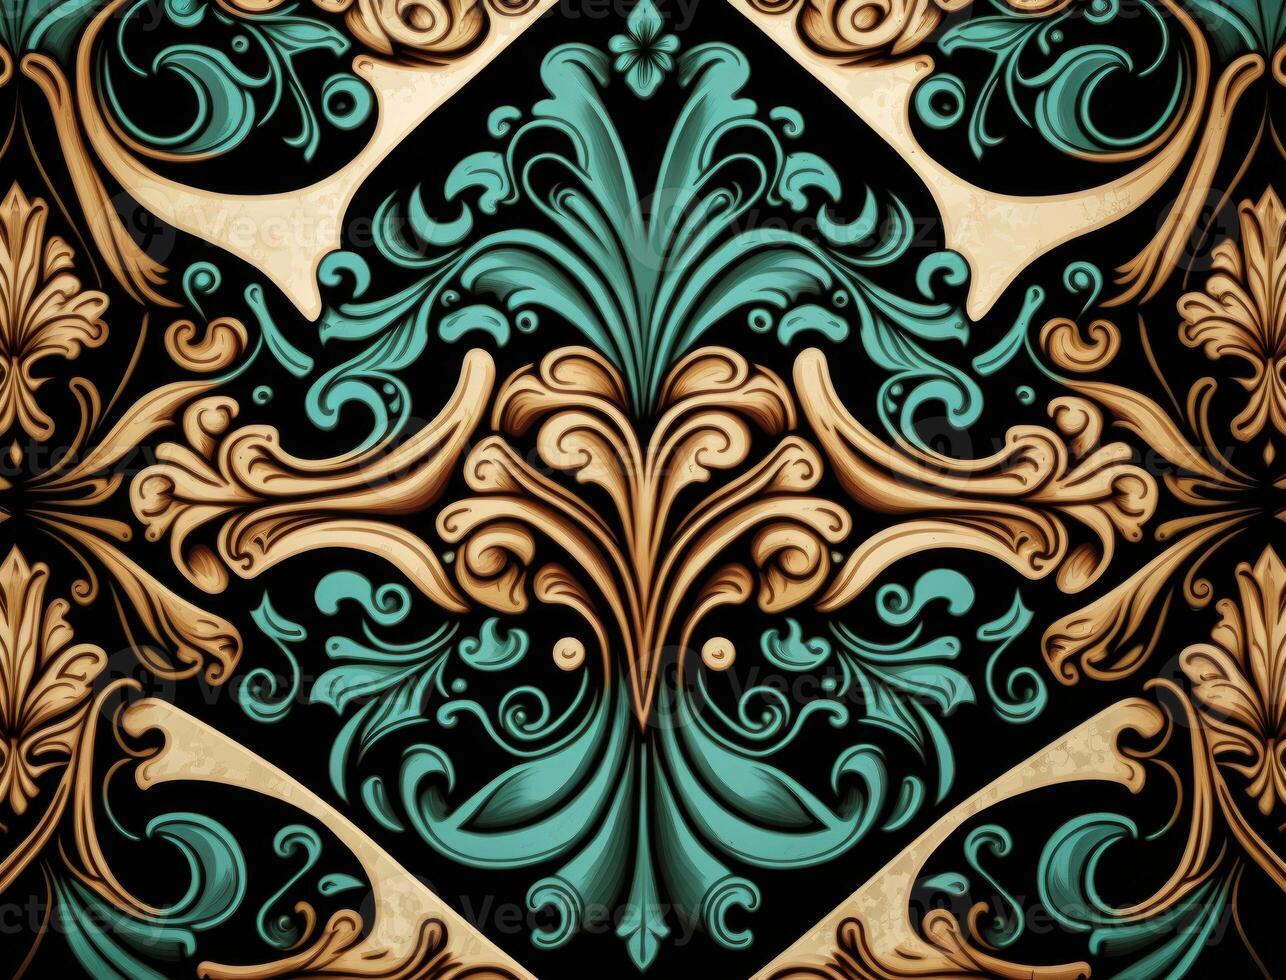 Royal vintage Victorian Gothic background Rococo venzel and whorl created with technology photo